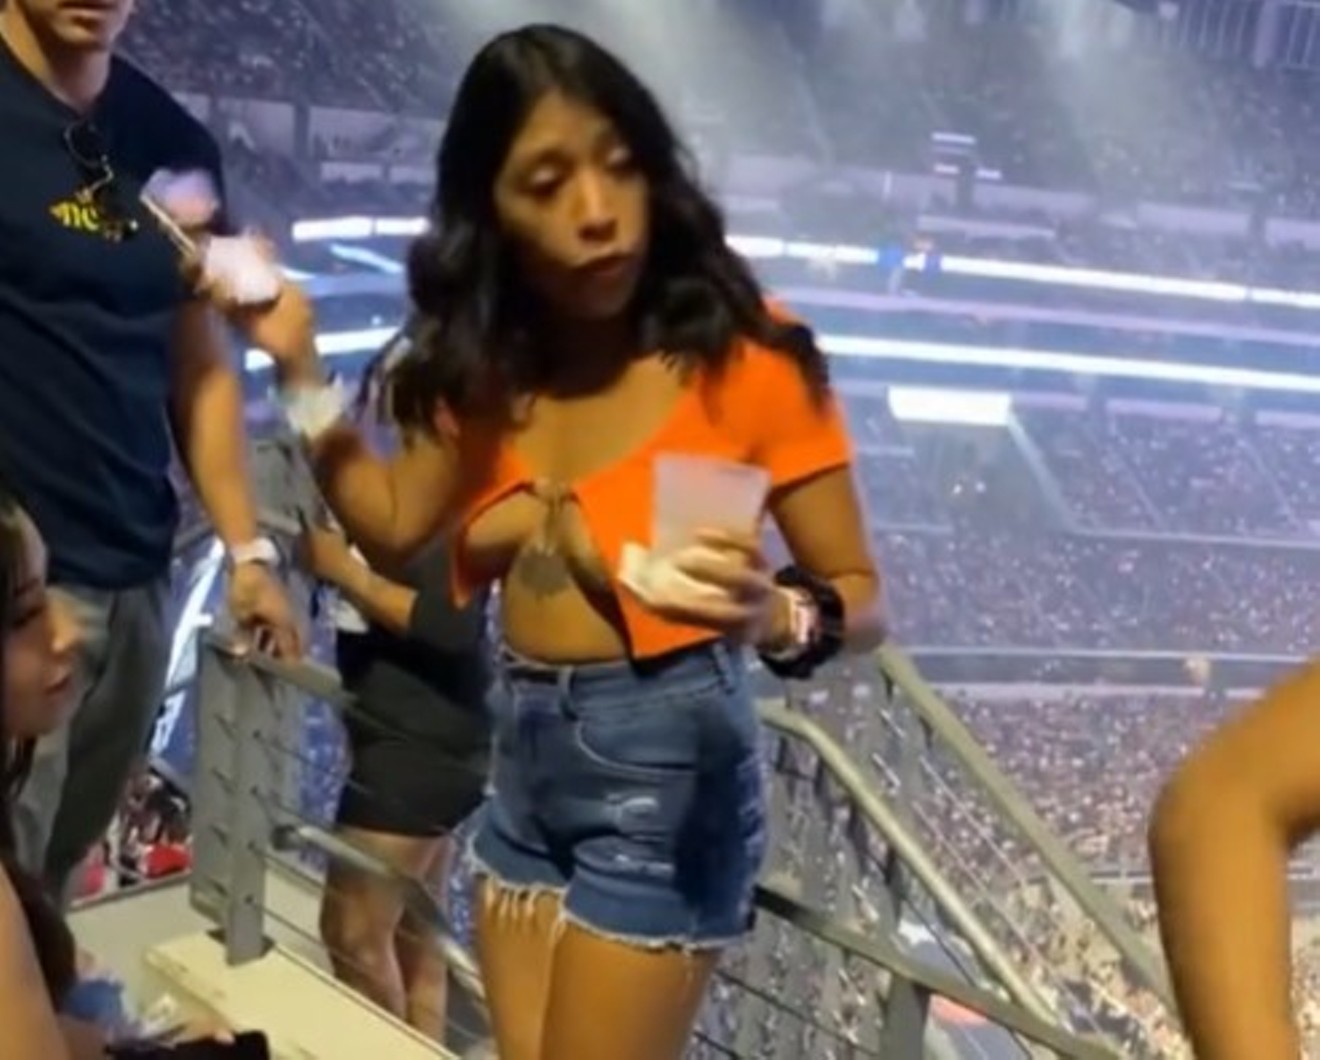 Fans say Minute Maid Park field 'looks horrible' after Bad Bunny concert